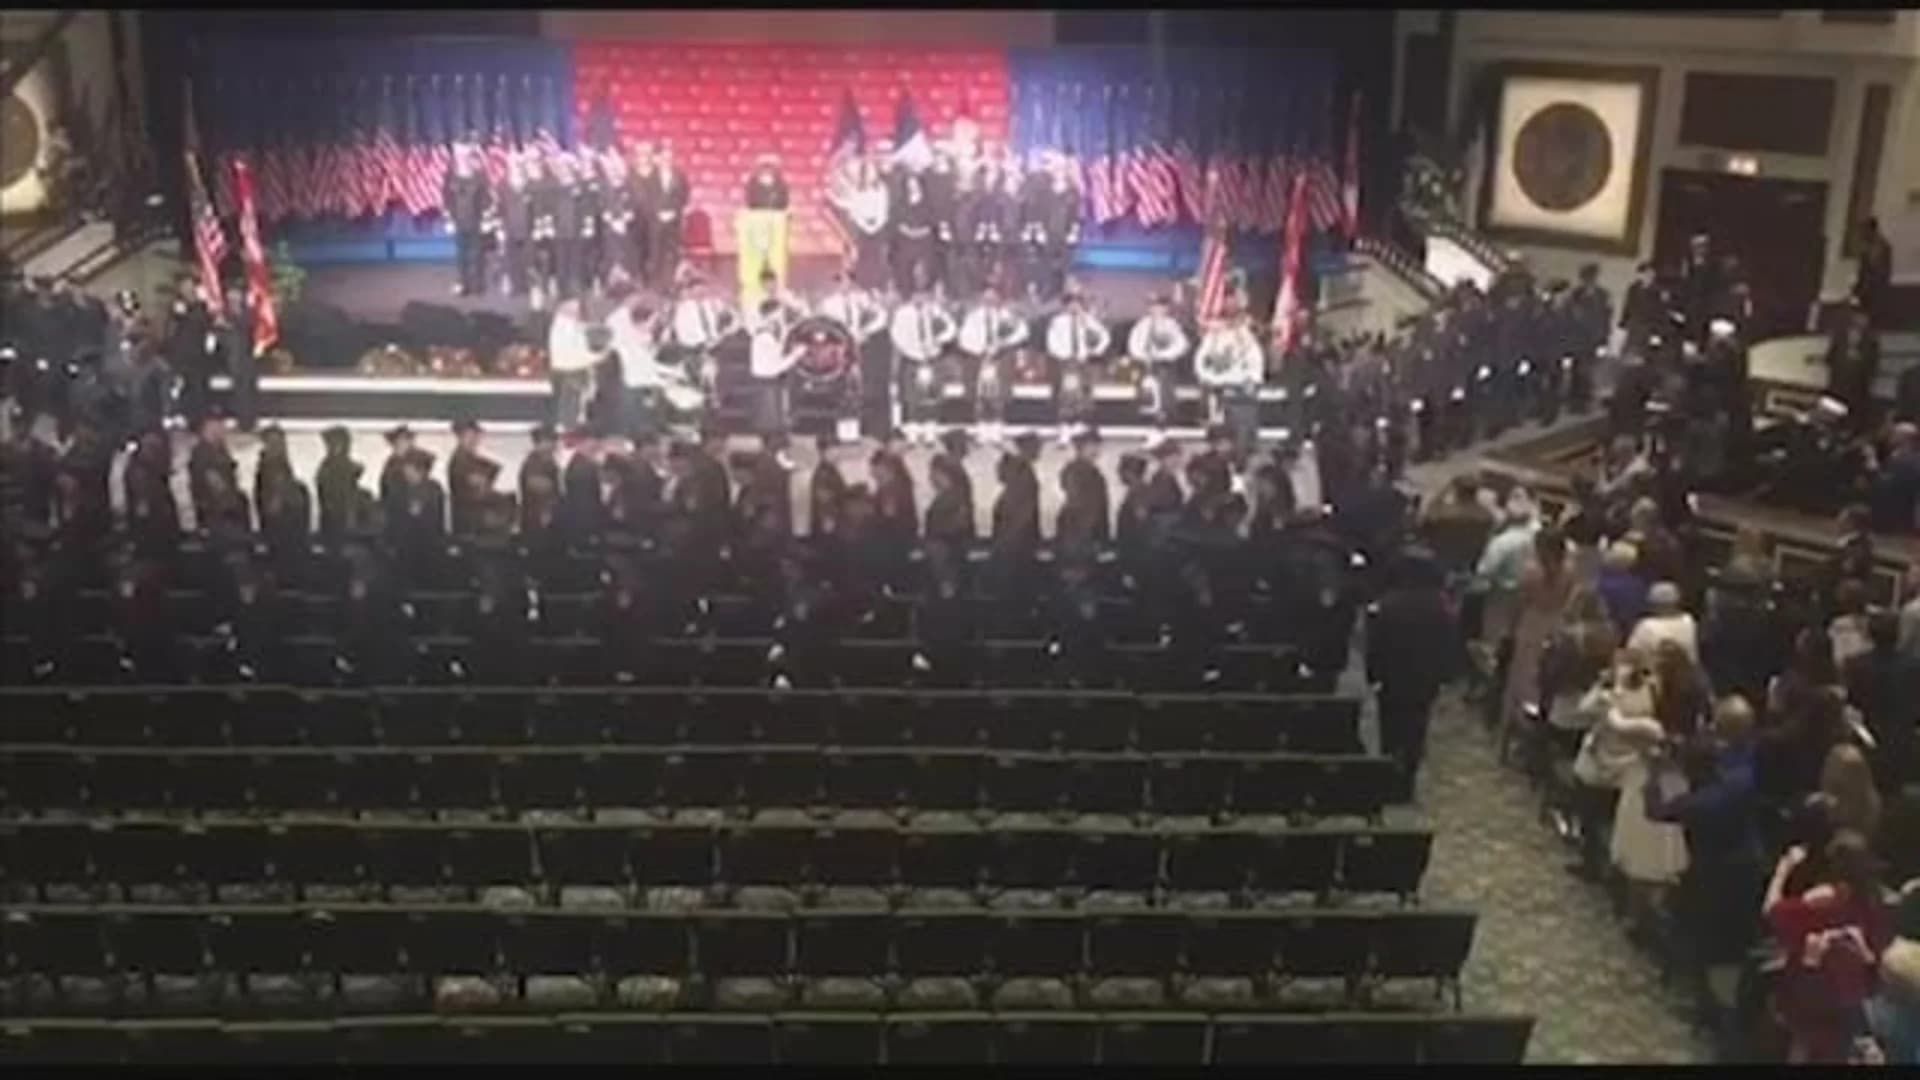 279 probationary FDNY firefighters graduate